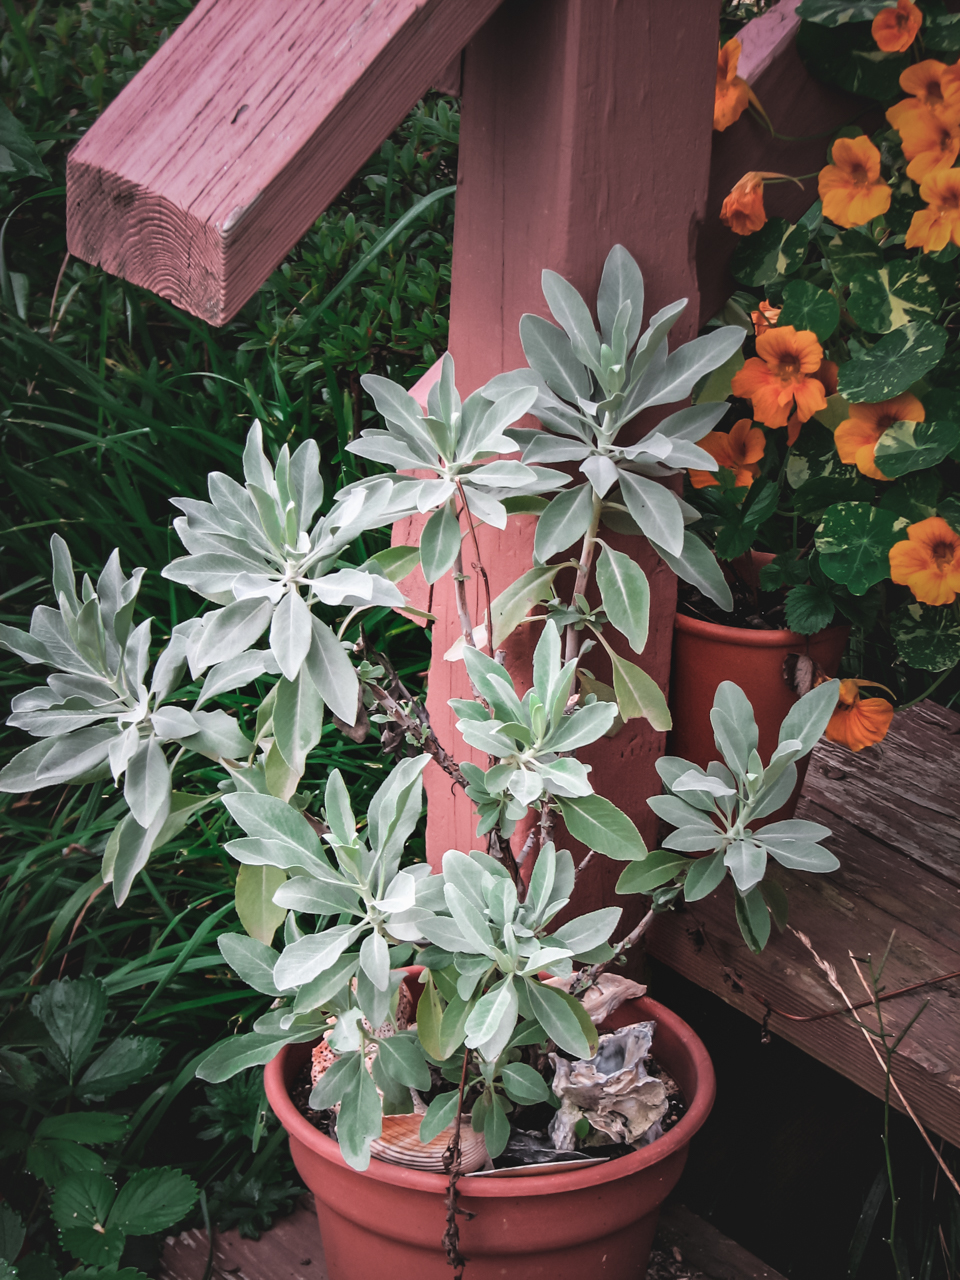 White Sage (Salvia apiana) is a medicinal herb shown growing in a pot.